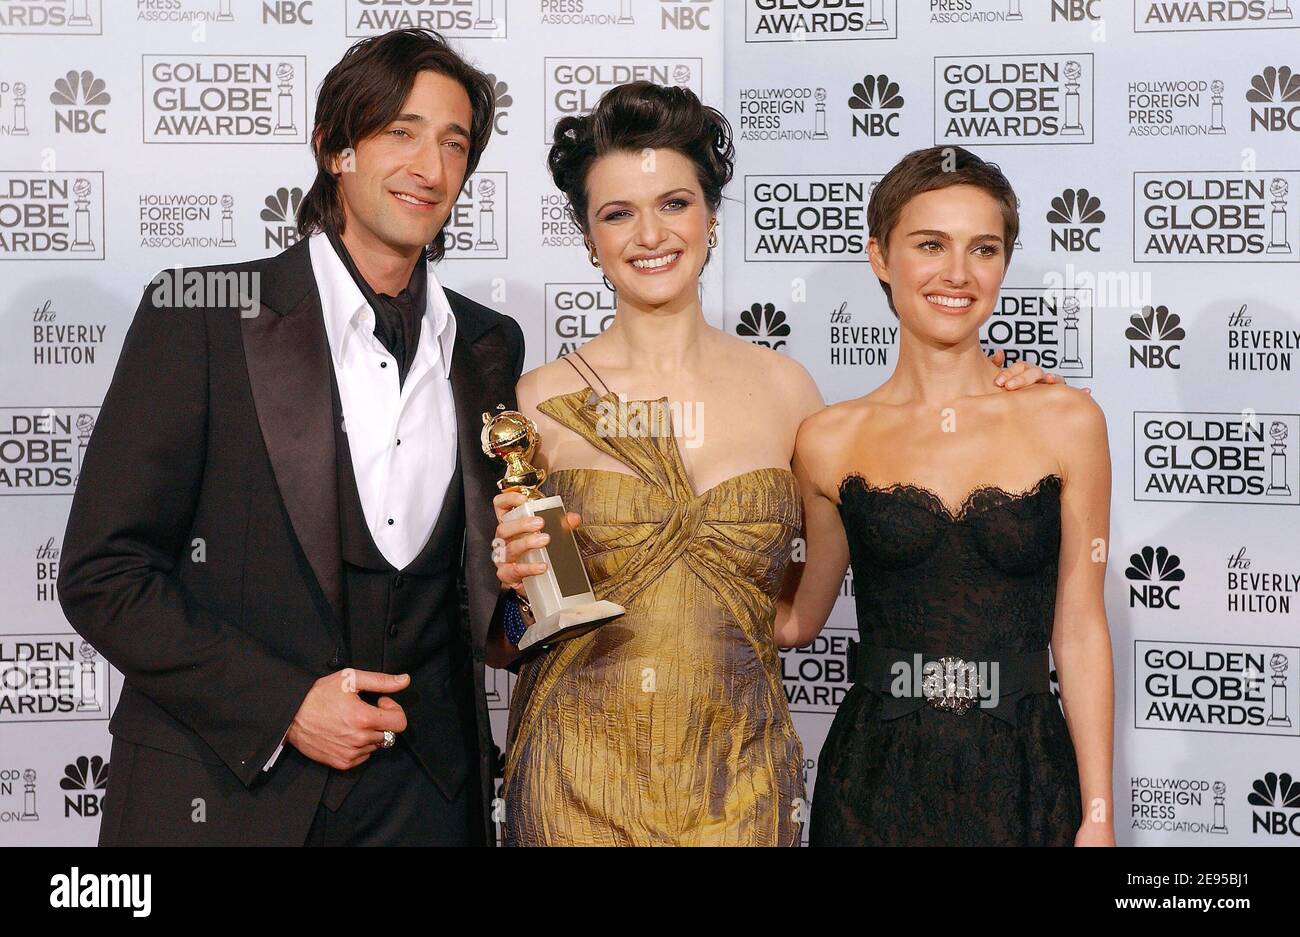 'Rachel Weisz (center), winner of Best Performance by an Actress in a Supporting Role in a Motion Picture for ''The Constant Gardener'', with presenters Adrien Brody and Natalie Portman, in the Pressroom at the 63rd Annual Golden Globe Awards at the Beverly Hilton Hotel in Los Angeles, CA, USA on January 16, 2006. Photo By Hahn-Khayat/ABACAPRESS.COM' Stock Photo